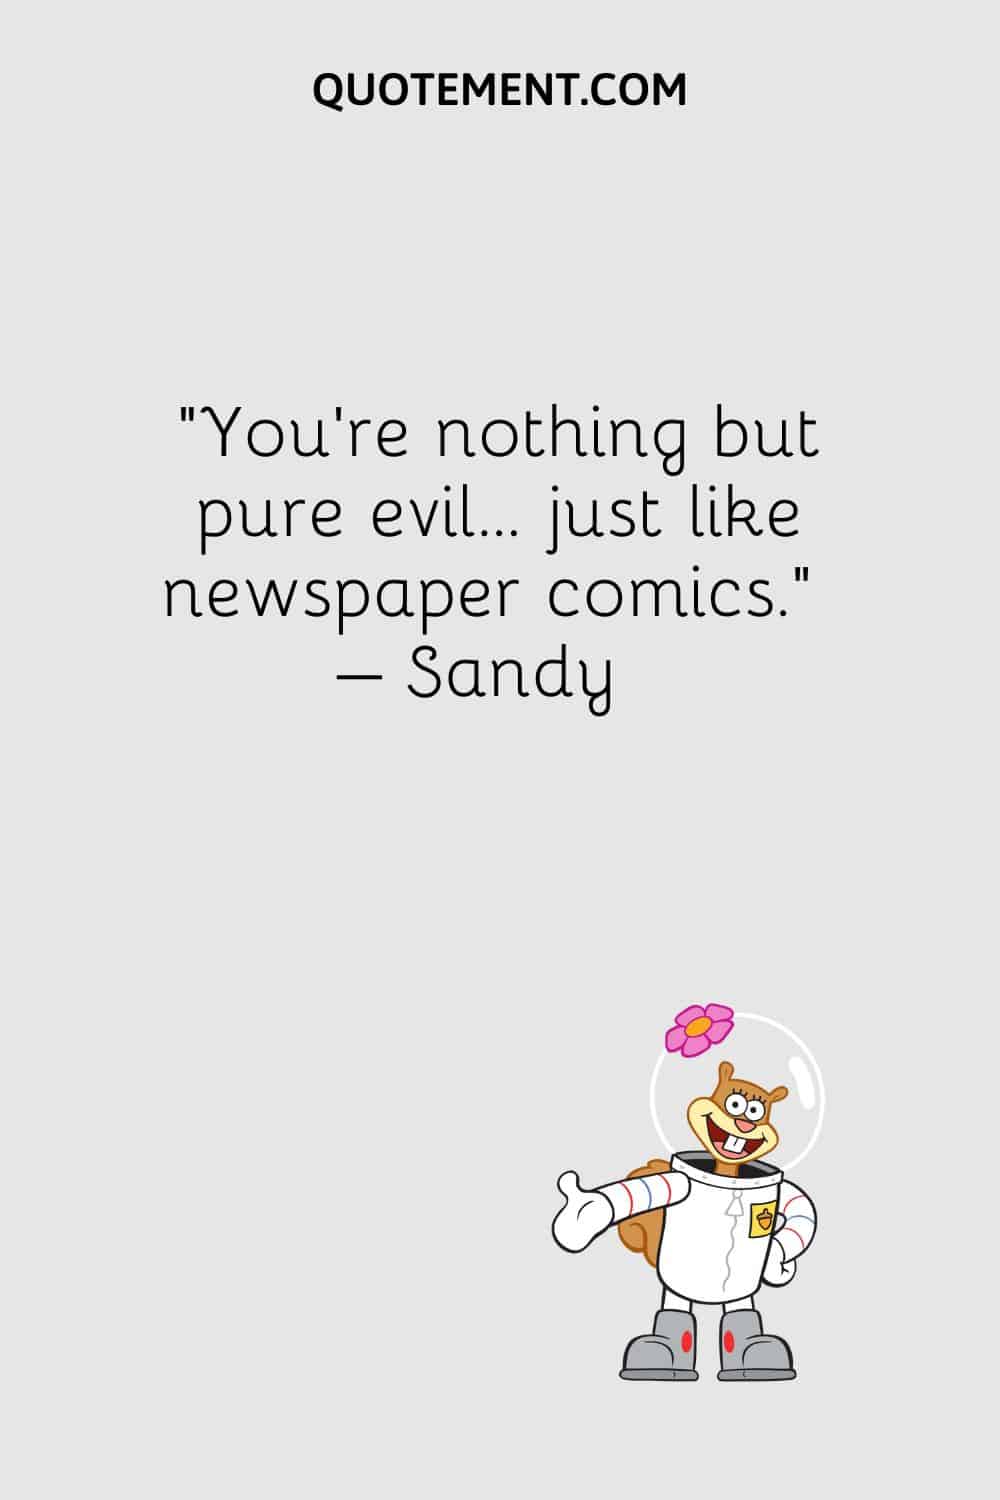 “You’re nothing but pure evil… just like newspaper comics.” – Sandy